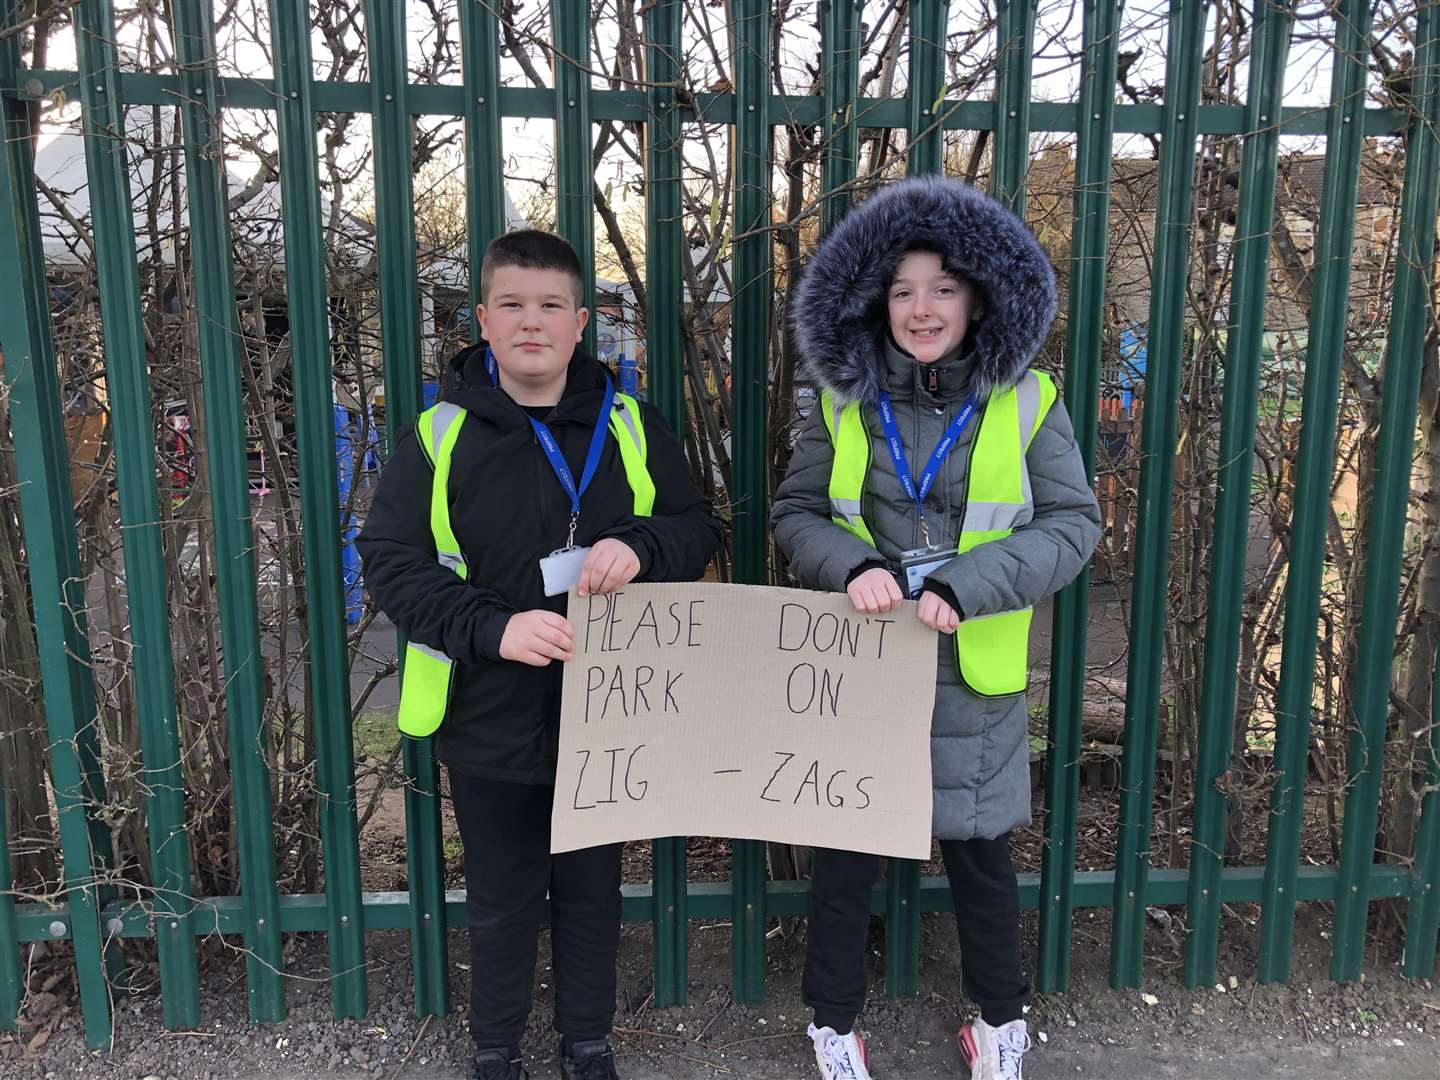 The Year 6 prefects were out on the street to try and get their message across